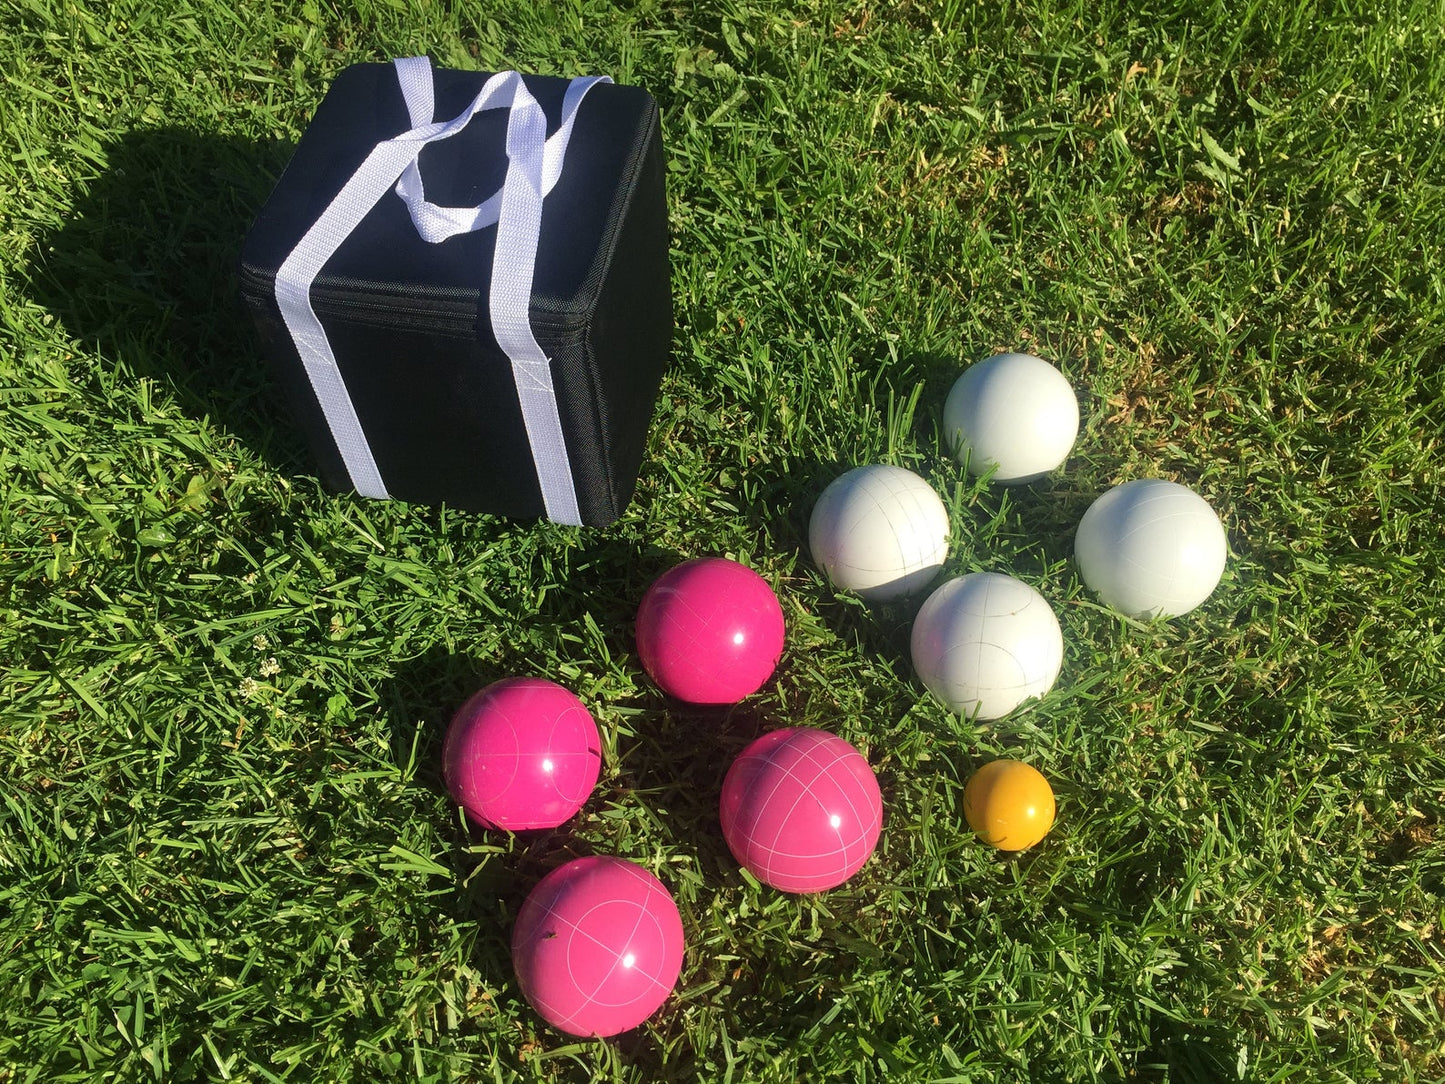 107mm Bocce White and Pink Balls with Black Bag